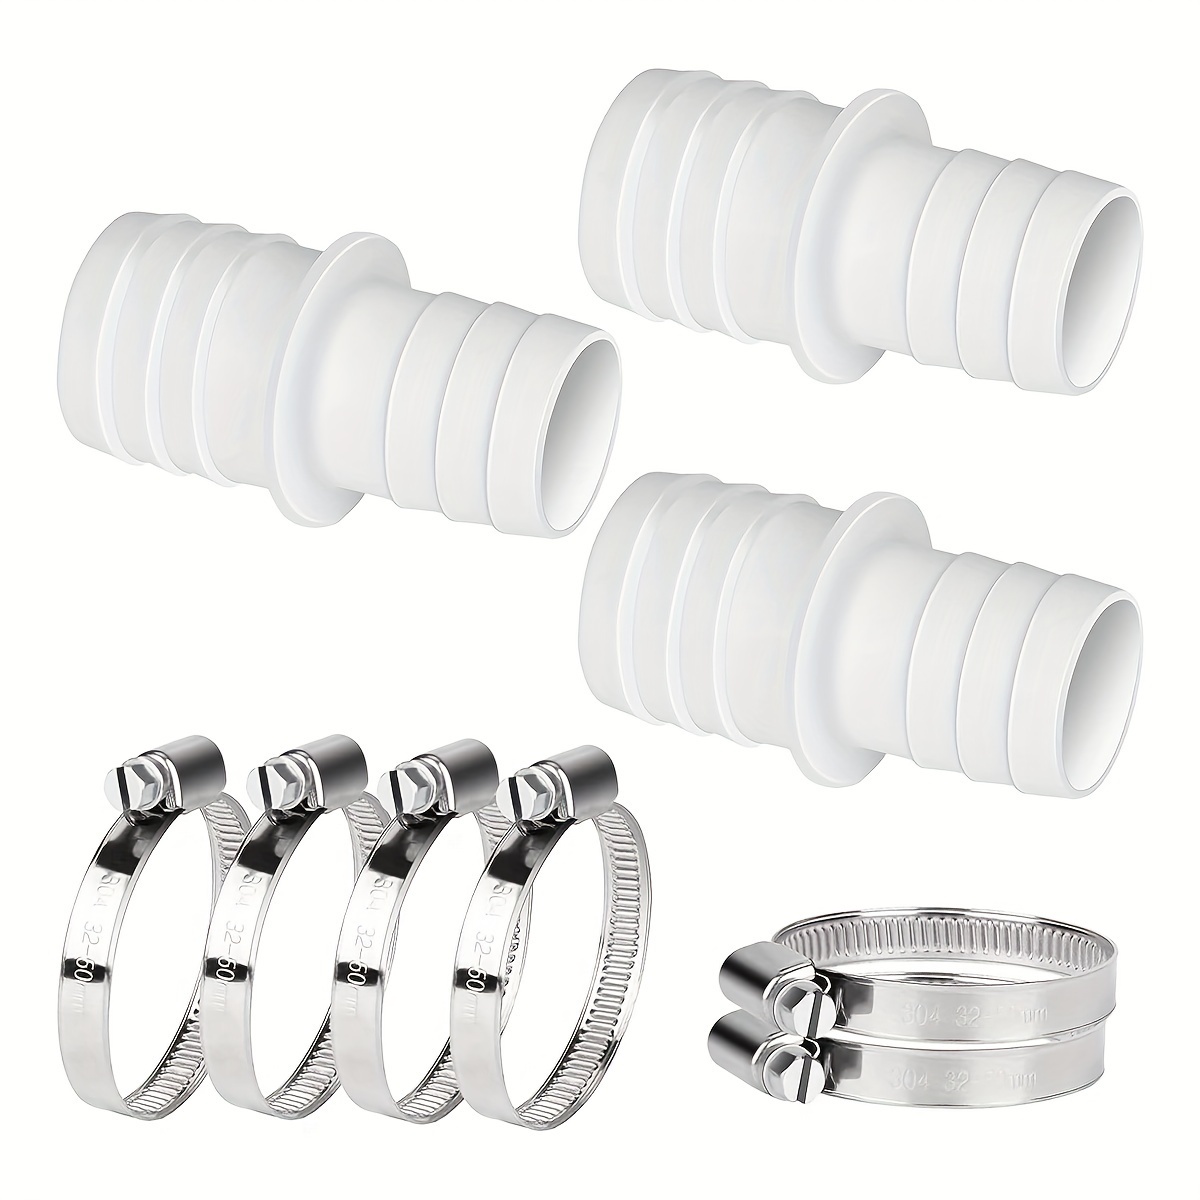 

1 Set Plastic Pool Hose Adapters 1.26-1.5in/32-38mm, White Double Ended Hose Fittings, With Adjustable Stainless Steel Clamps